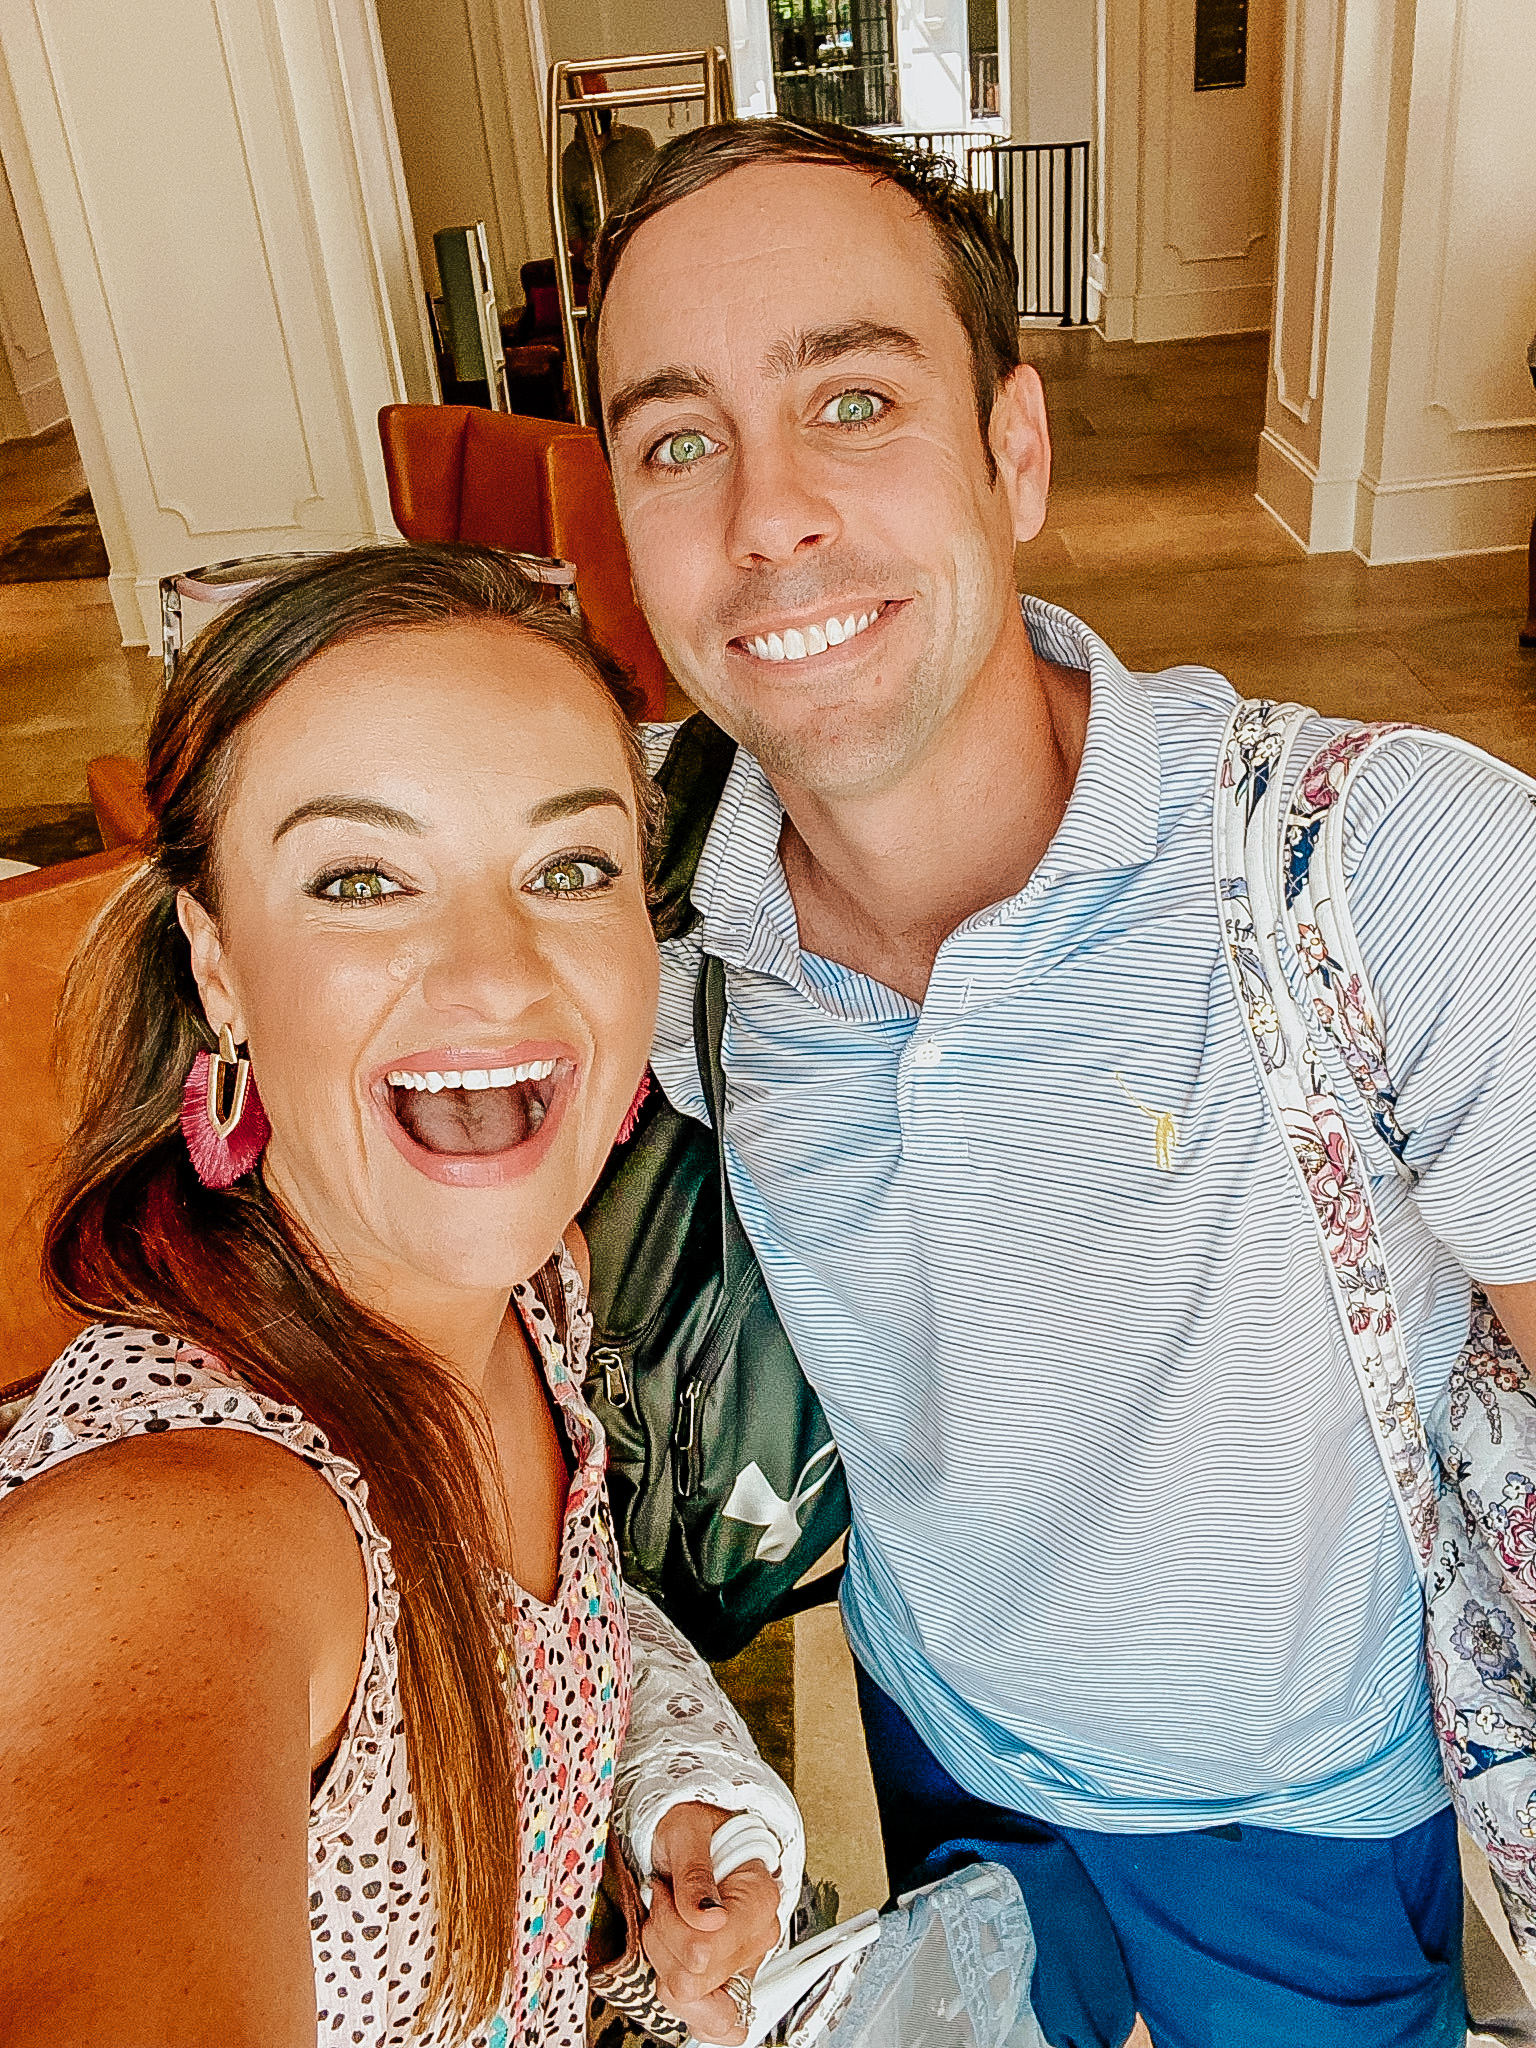 Travel + Lifestyle blogger, My Life Well Loved, shares the top 5 romantic things to do in Chateau Elan! Click NOW to learn more!